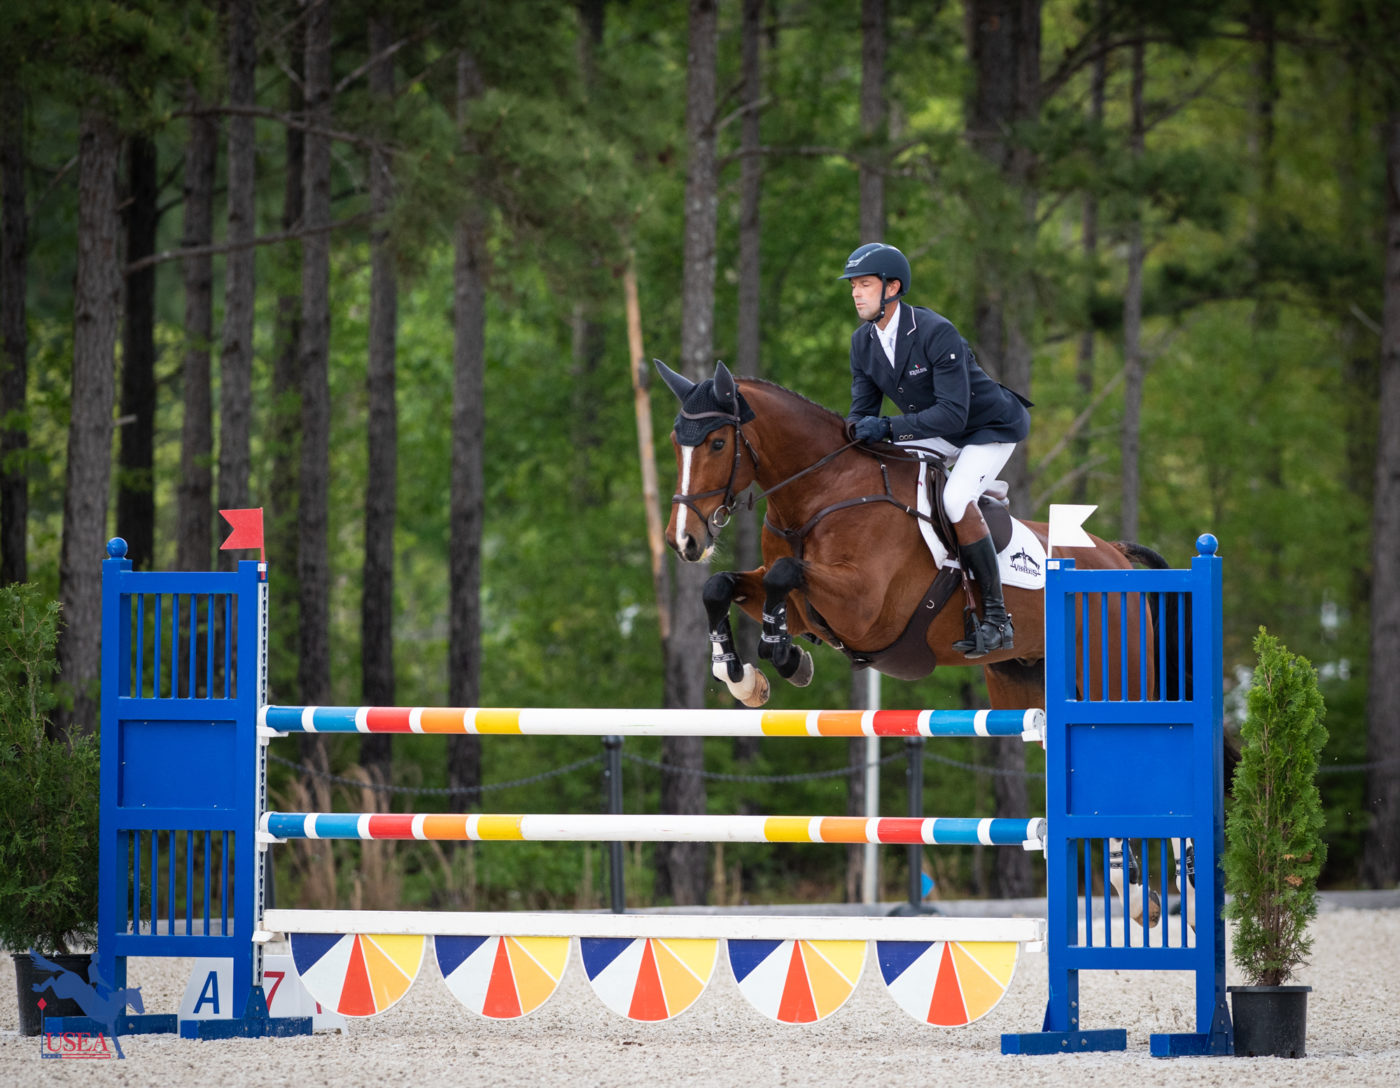 Will Coleman and Offf The Record jumped clear to move into third place. USEA/Lindsay Berreth photo